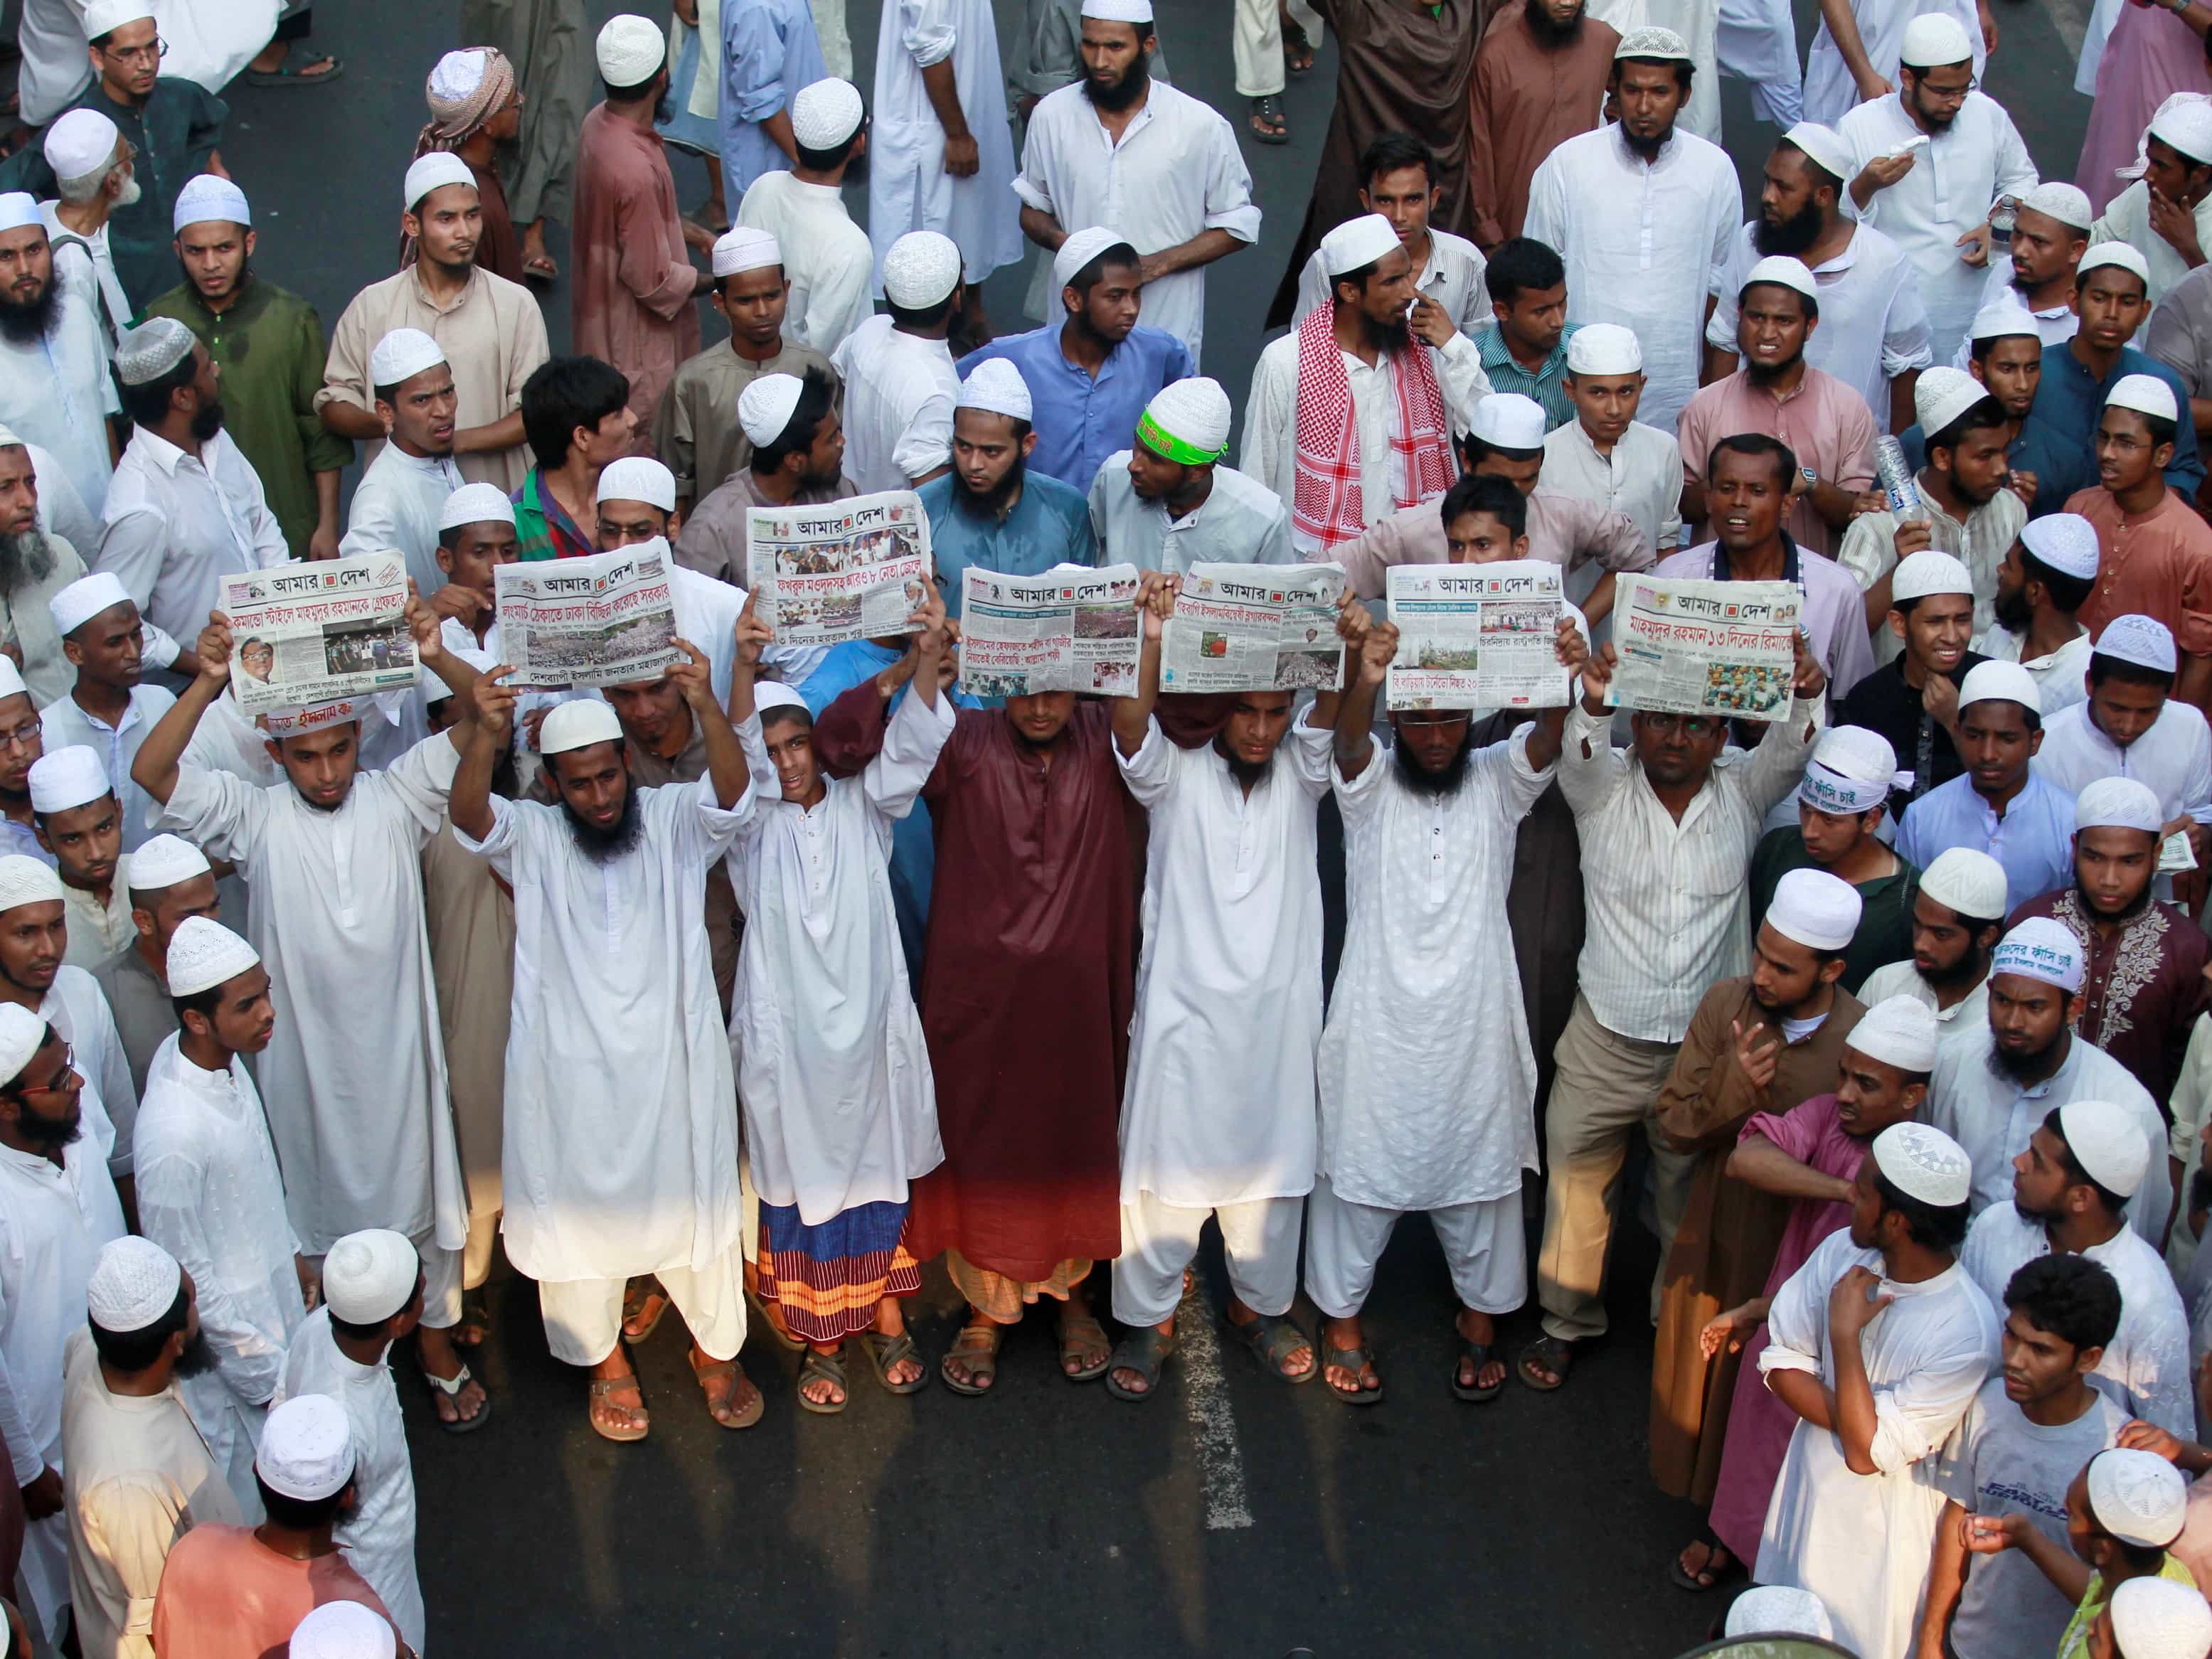 Activists of Hefajat-e-Islam hold copies of the "Amar Desh" paper during a rally in Dhaka, 12 April 2013, REUTERS/Andrew Biraj